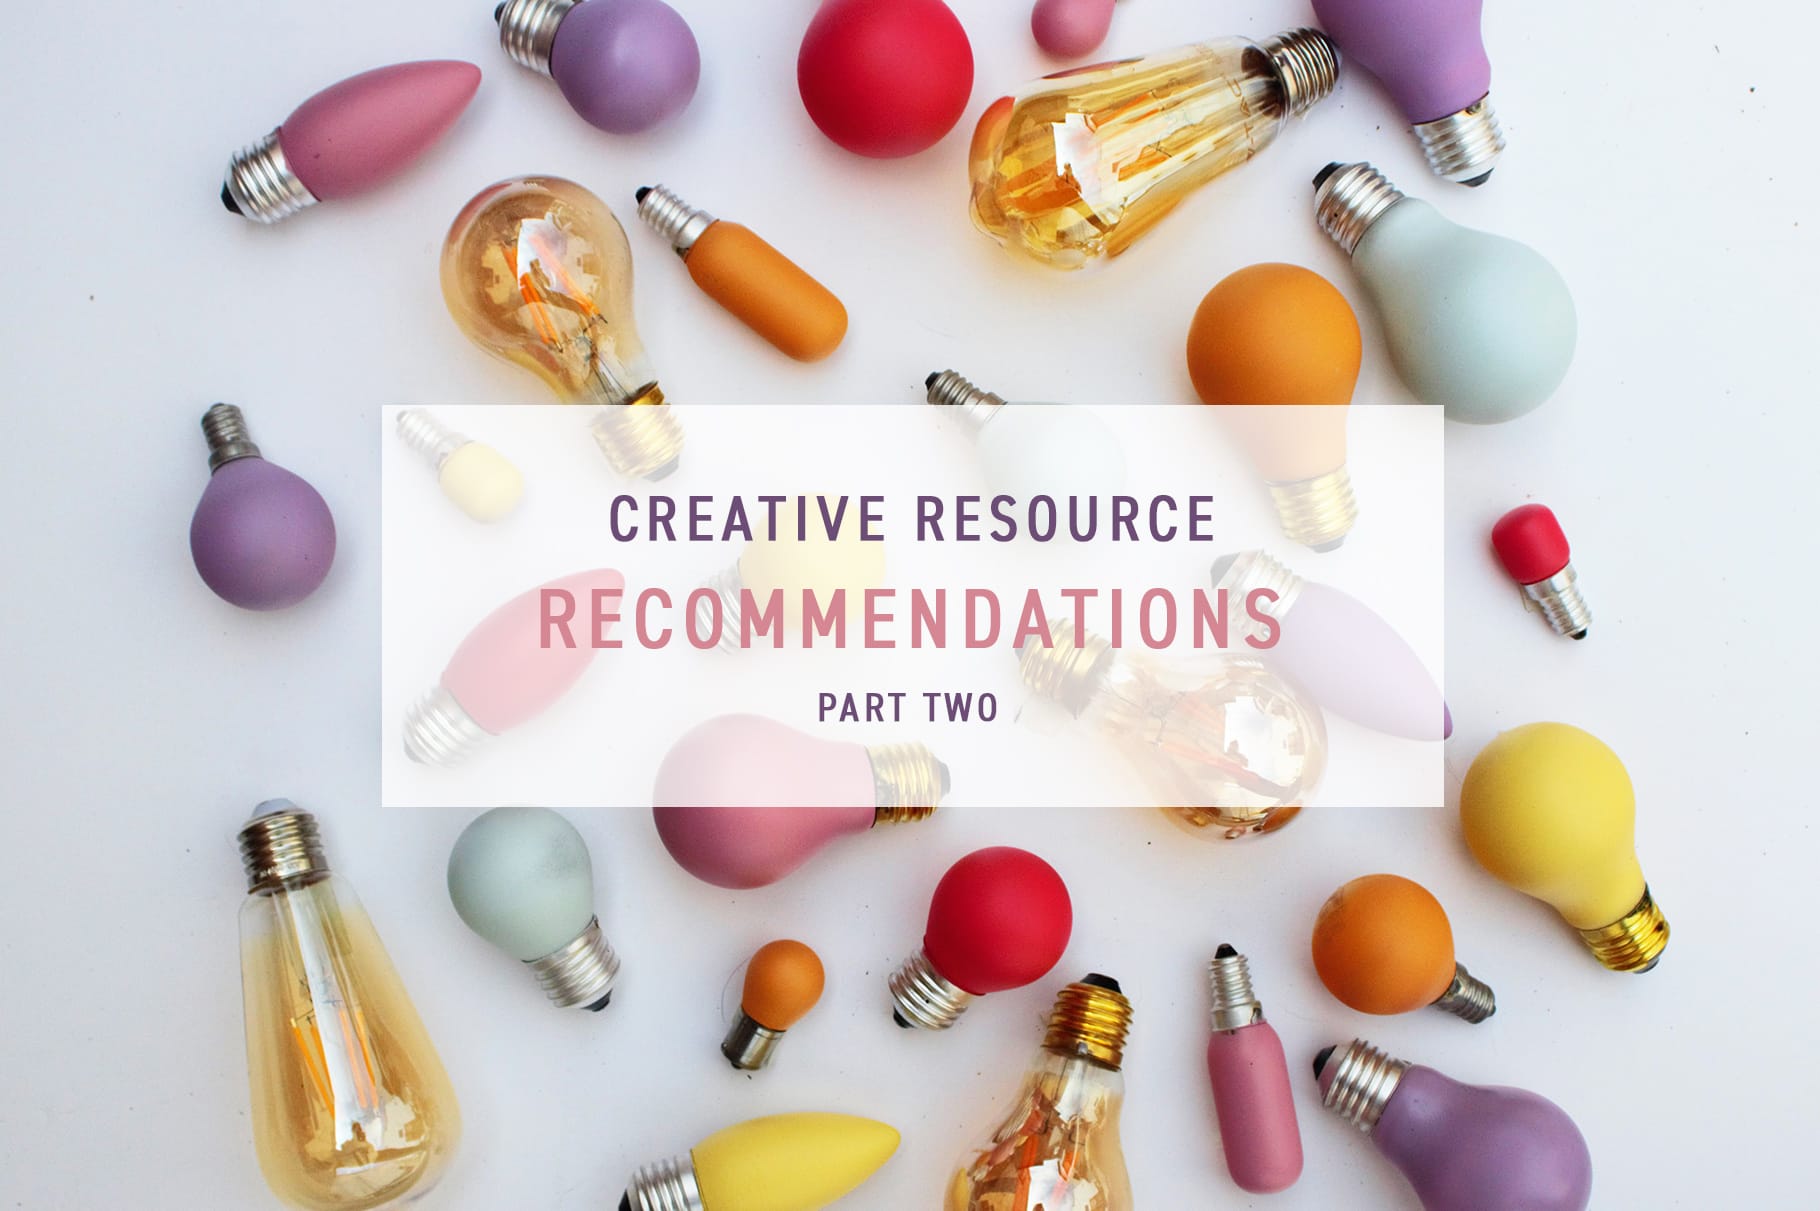 Creative Resource Recommendations Part 2